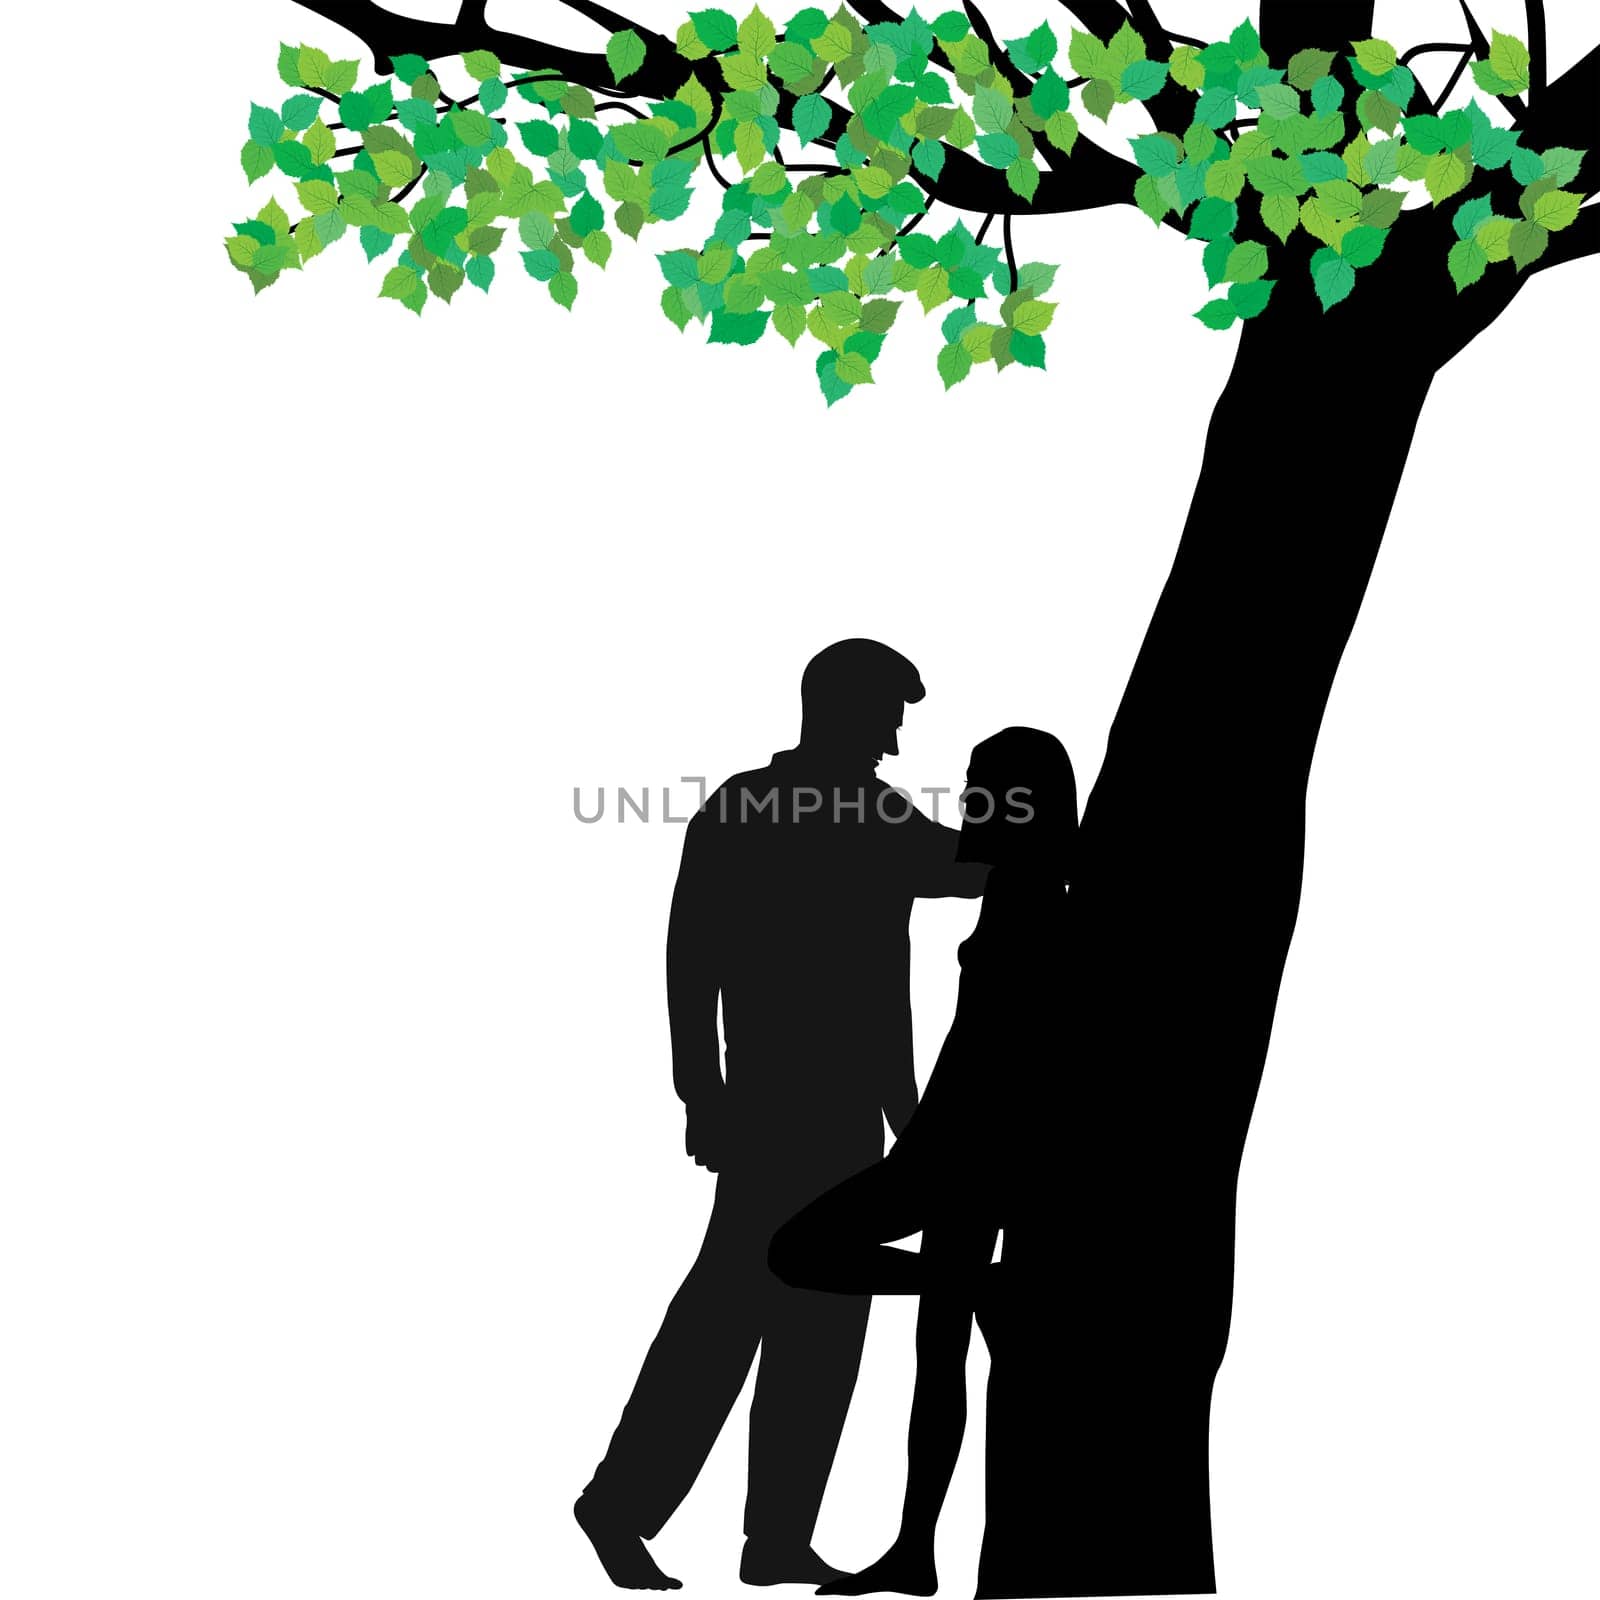 Couple lovers silhouette under a tree leaning against the tree trunk by hibrida13